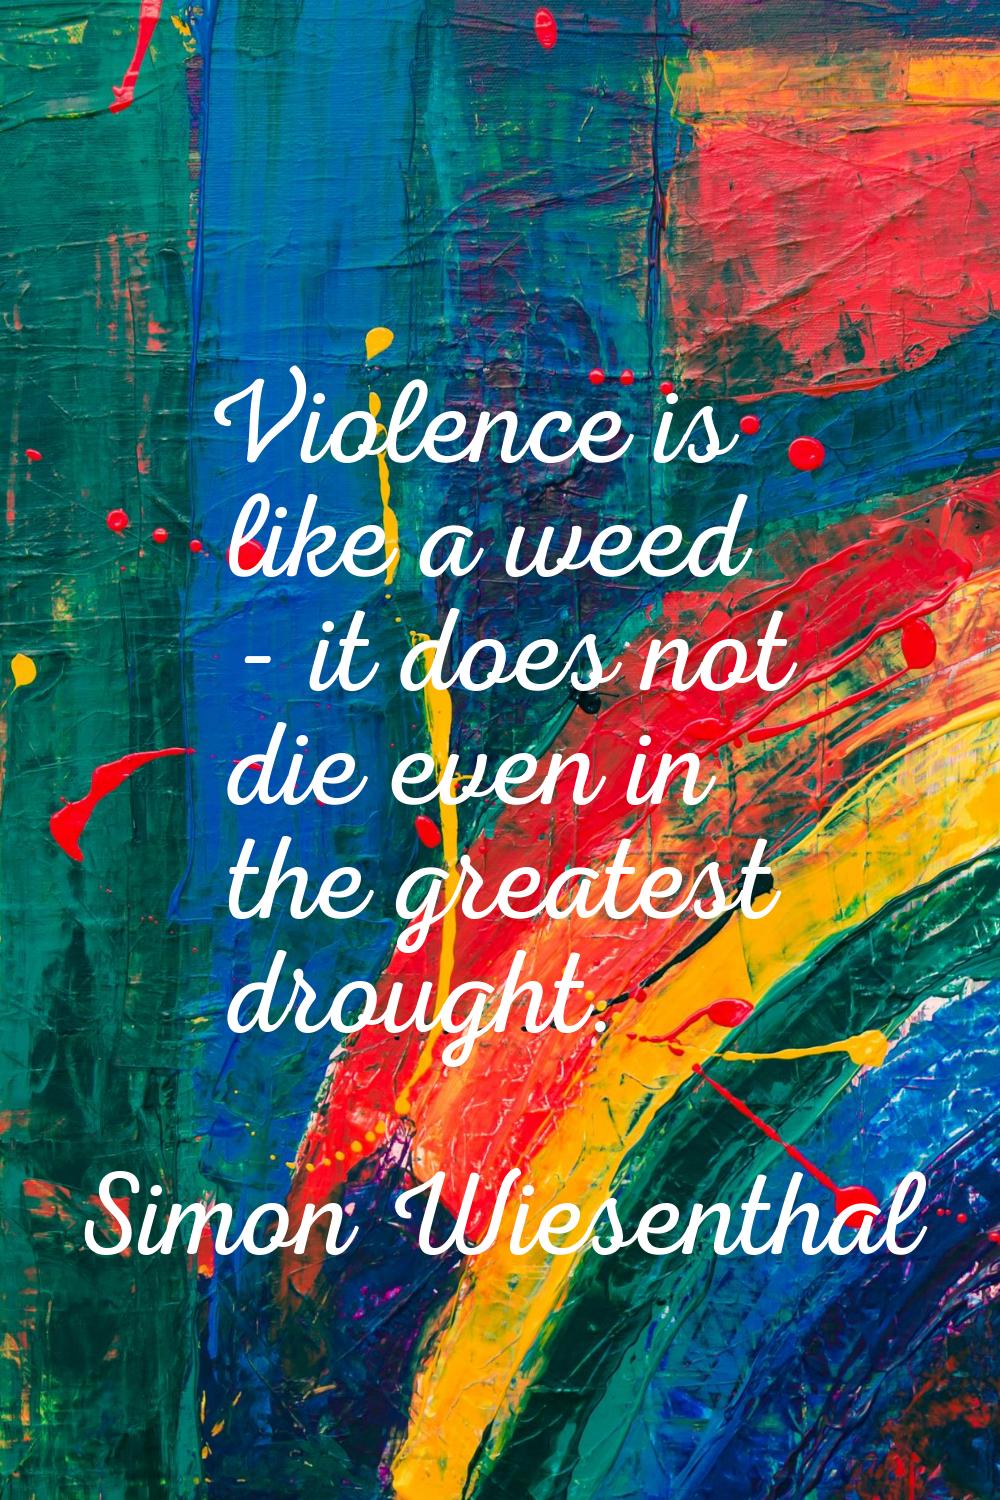 Violence is like a weed - it does not die even in the greatest drought.